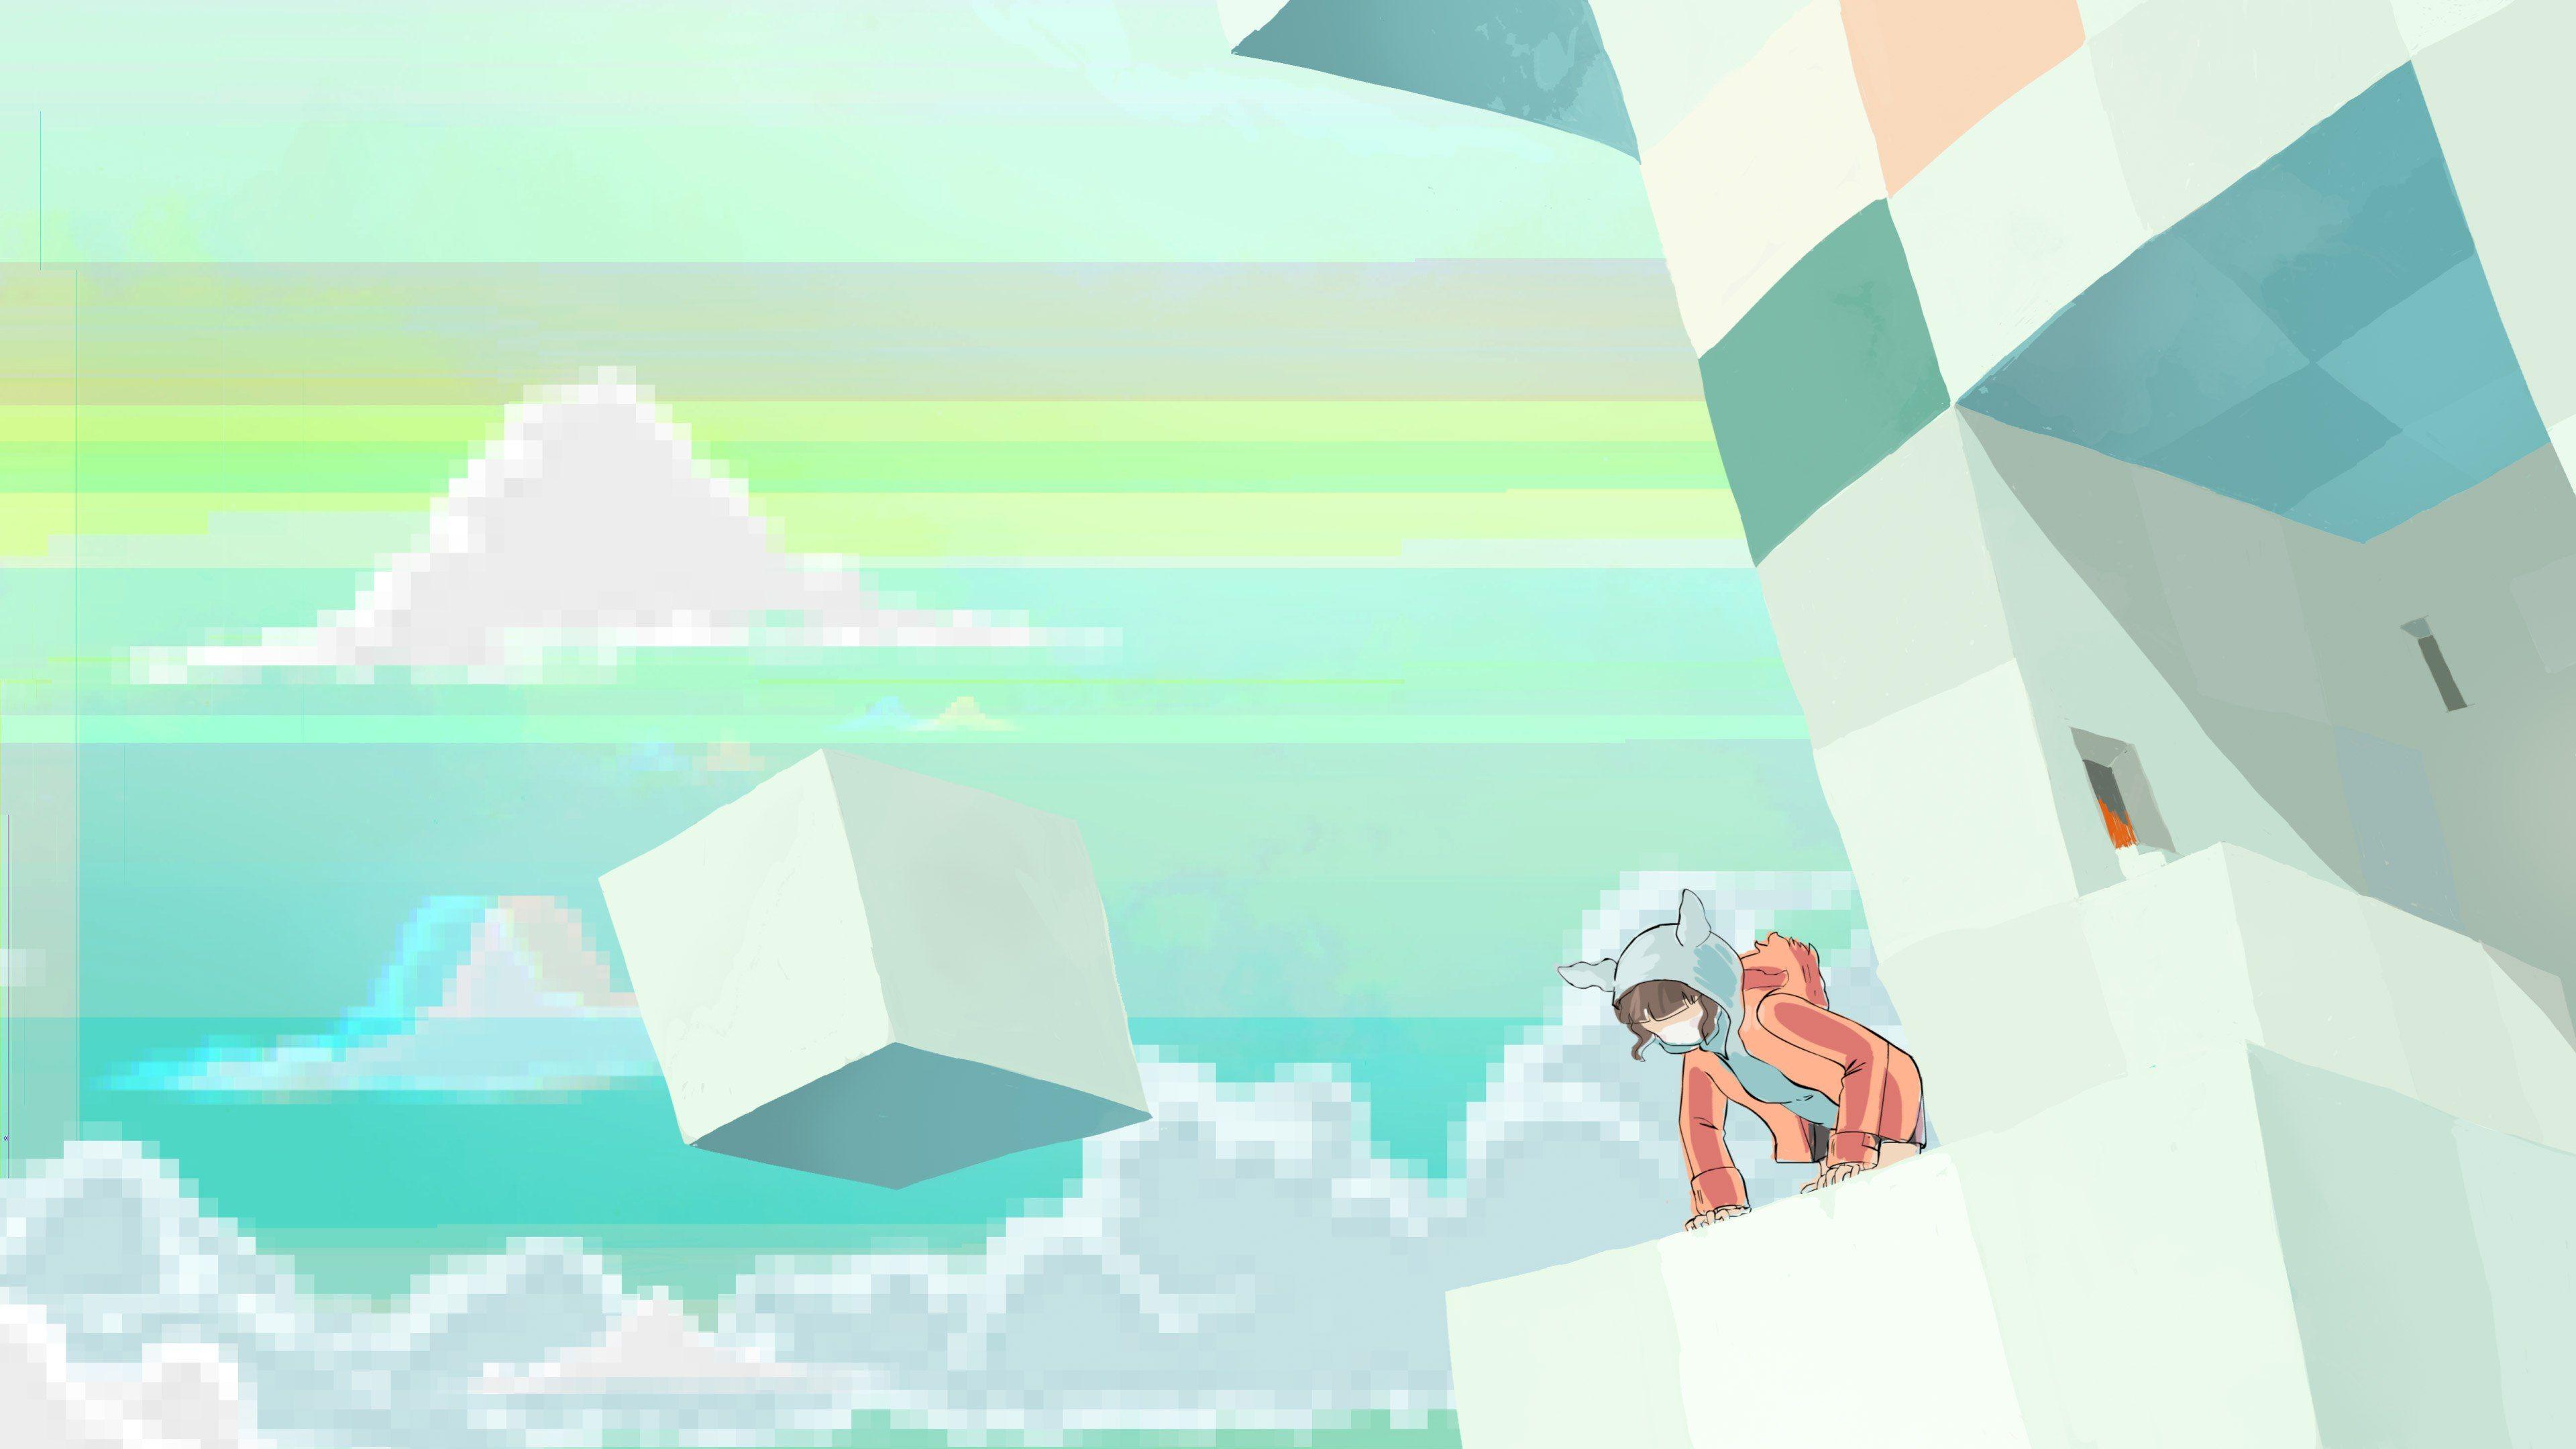 ILN Creates Visuals for Porter Robinson's 'Worlds' Tour. Animation